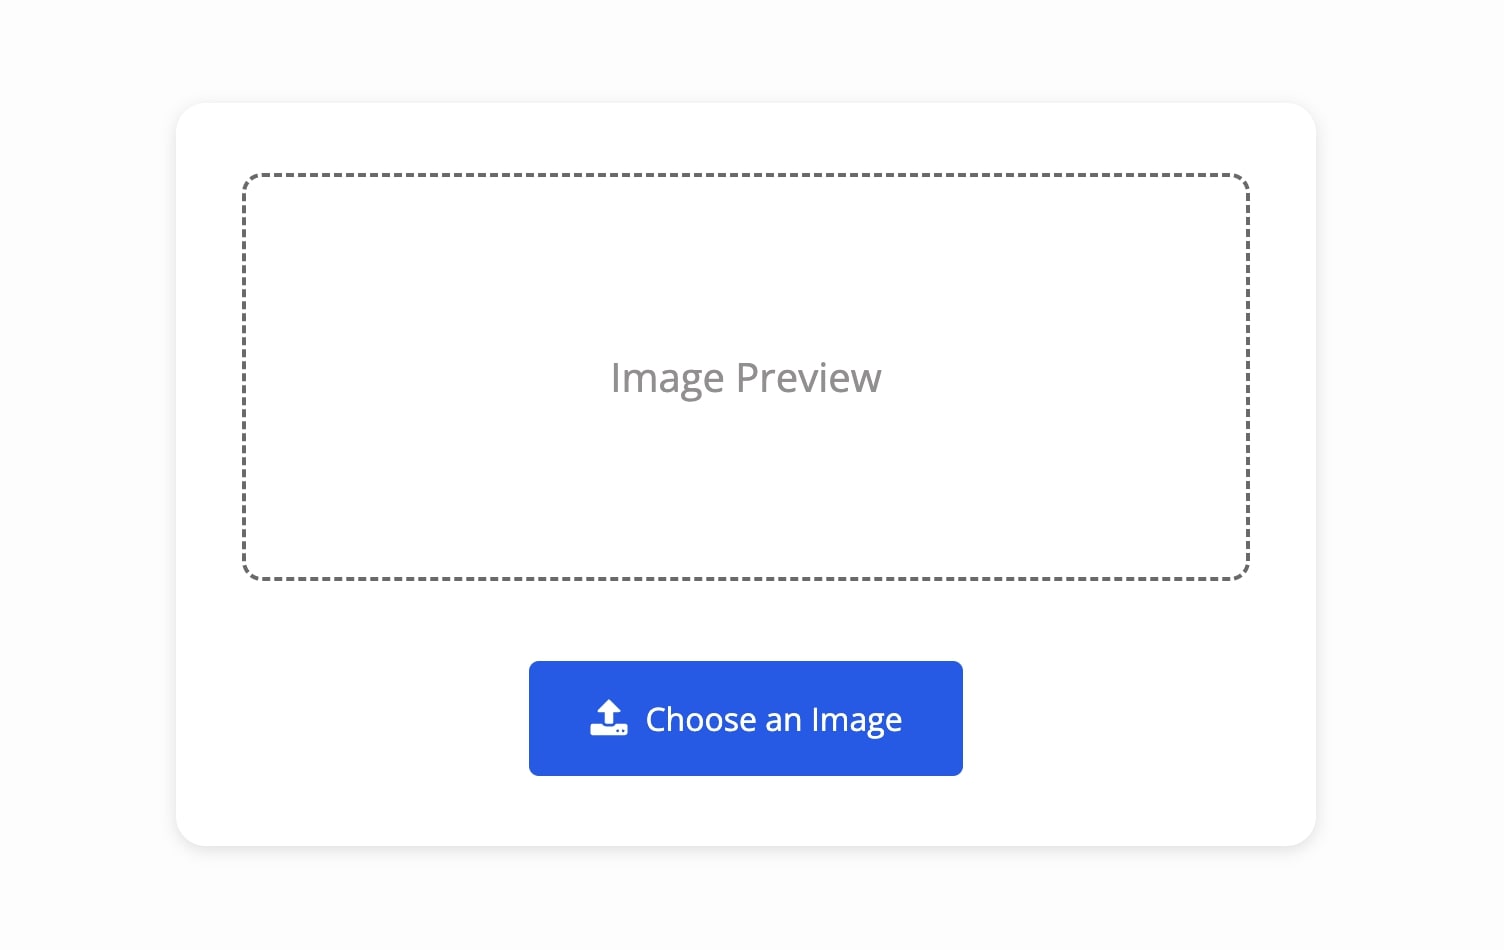 Create a Web Page Layout With HTML and CSS to preview image before upload